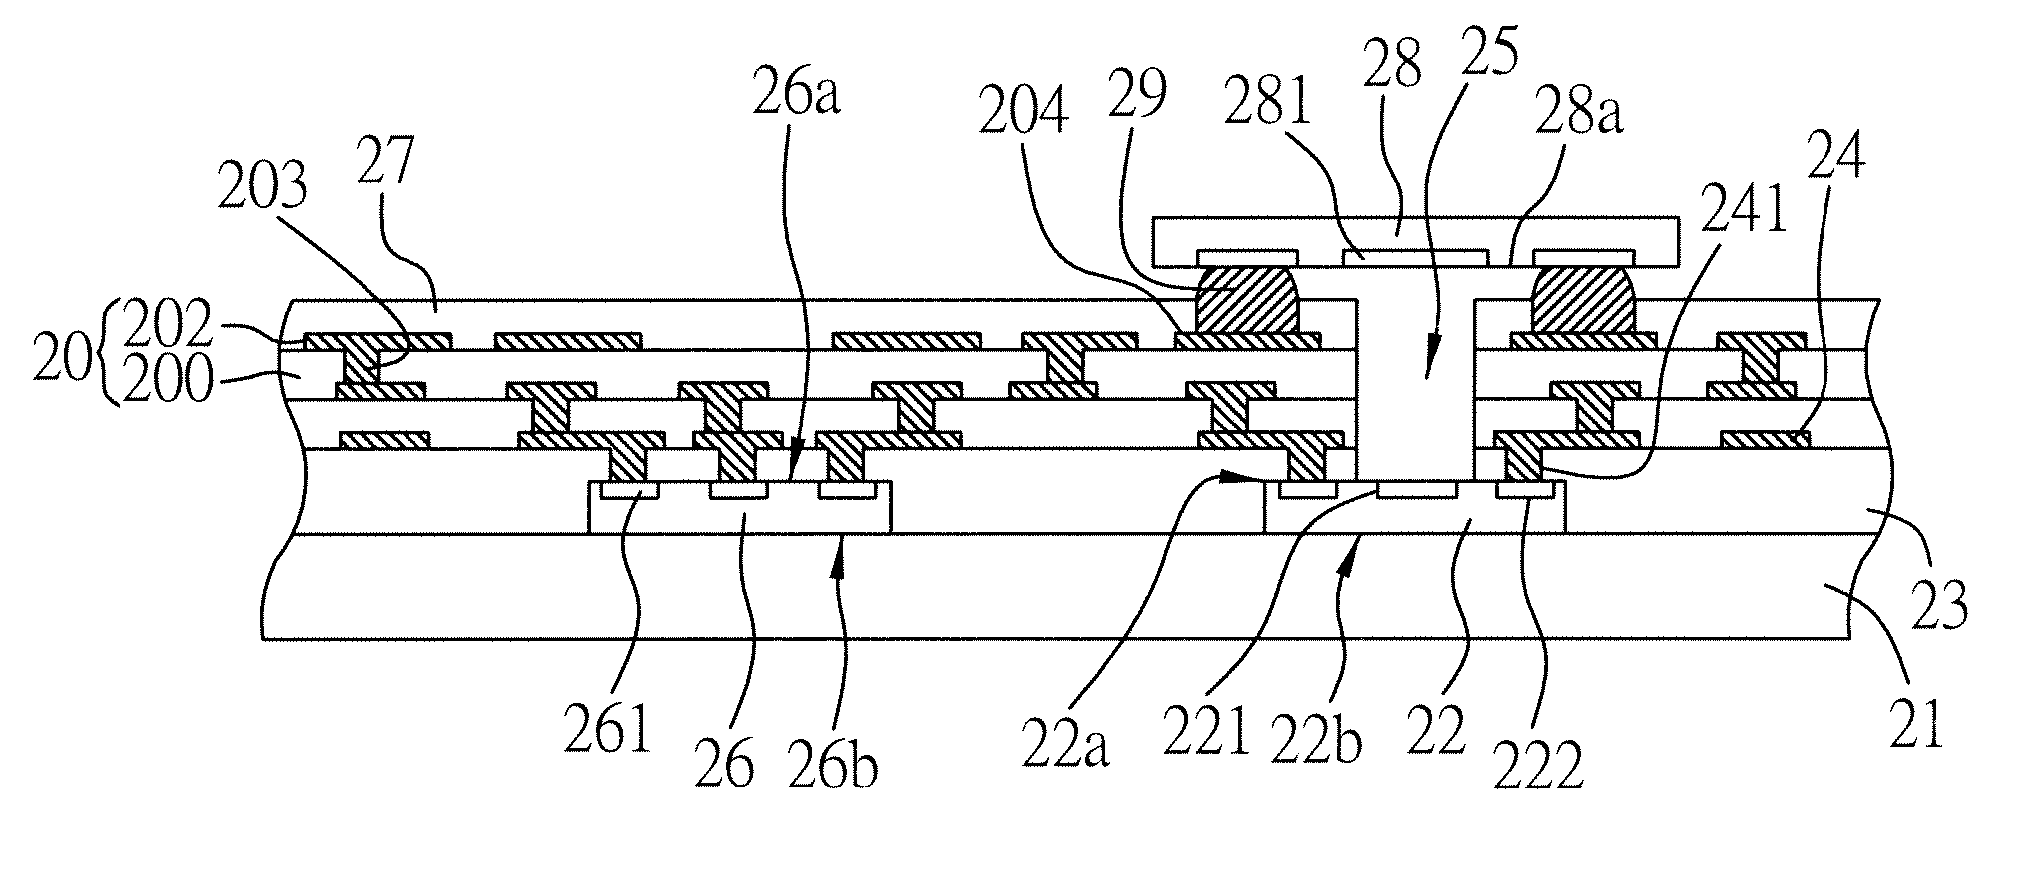 Circuit Board Structure of Integrated Optoelectronic Component